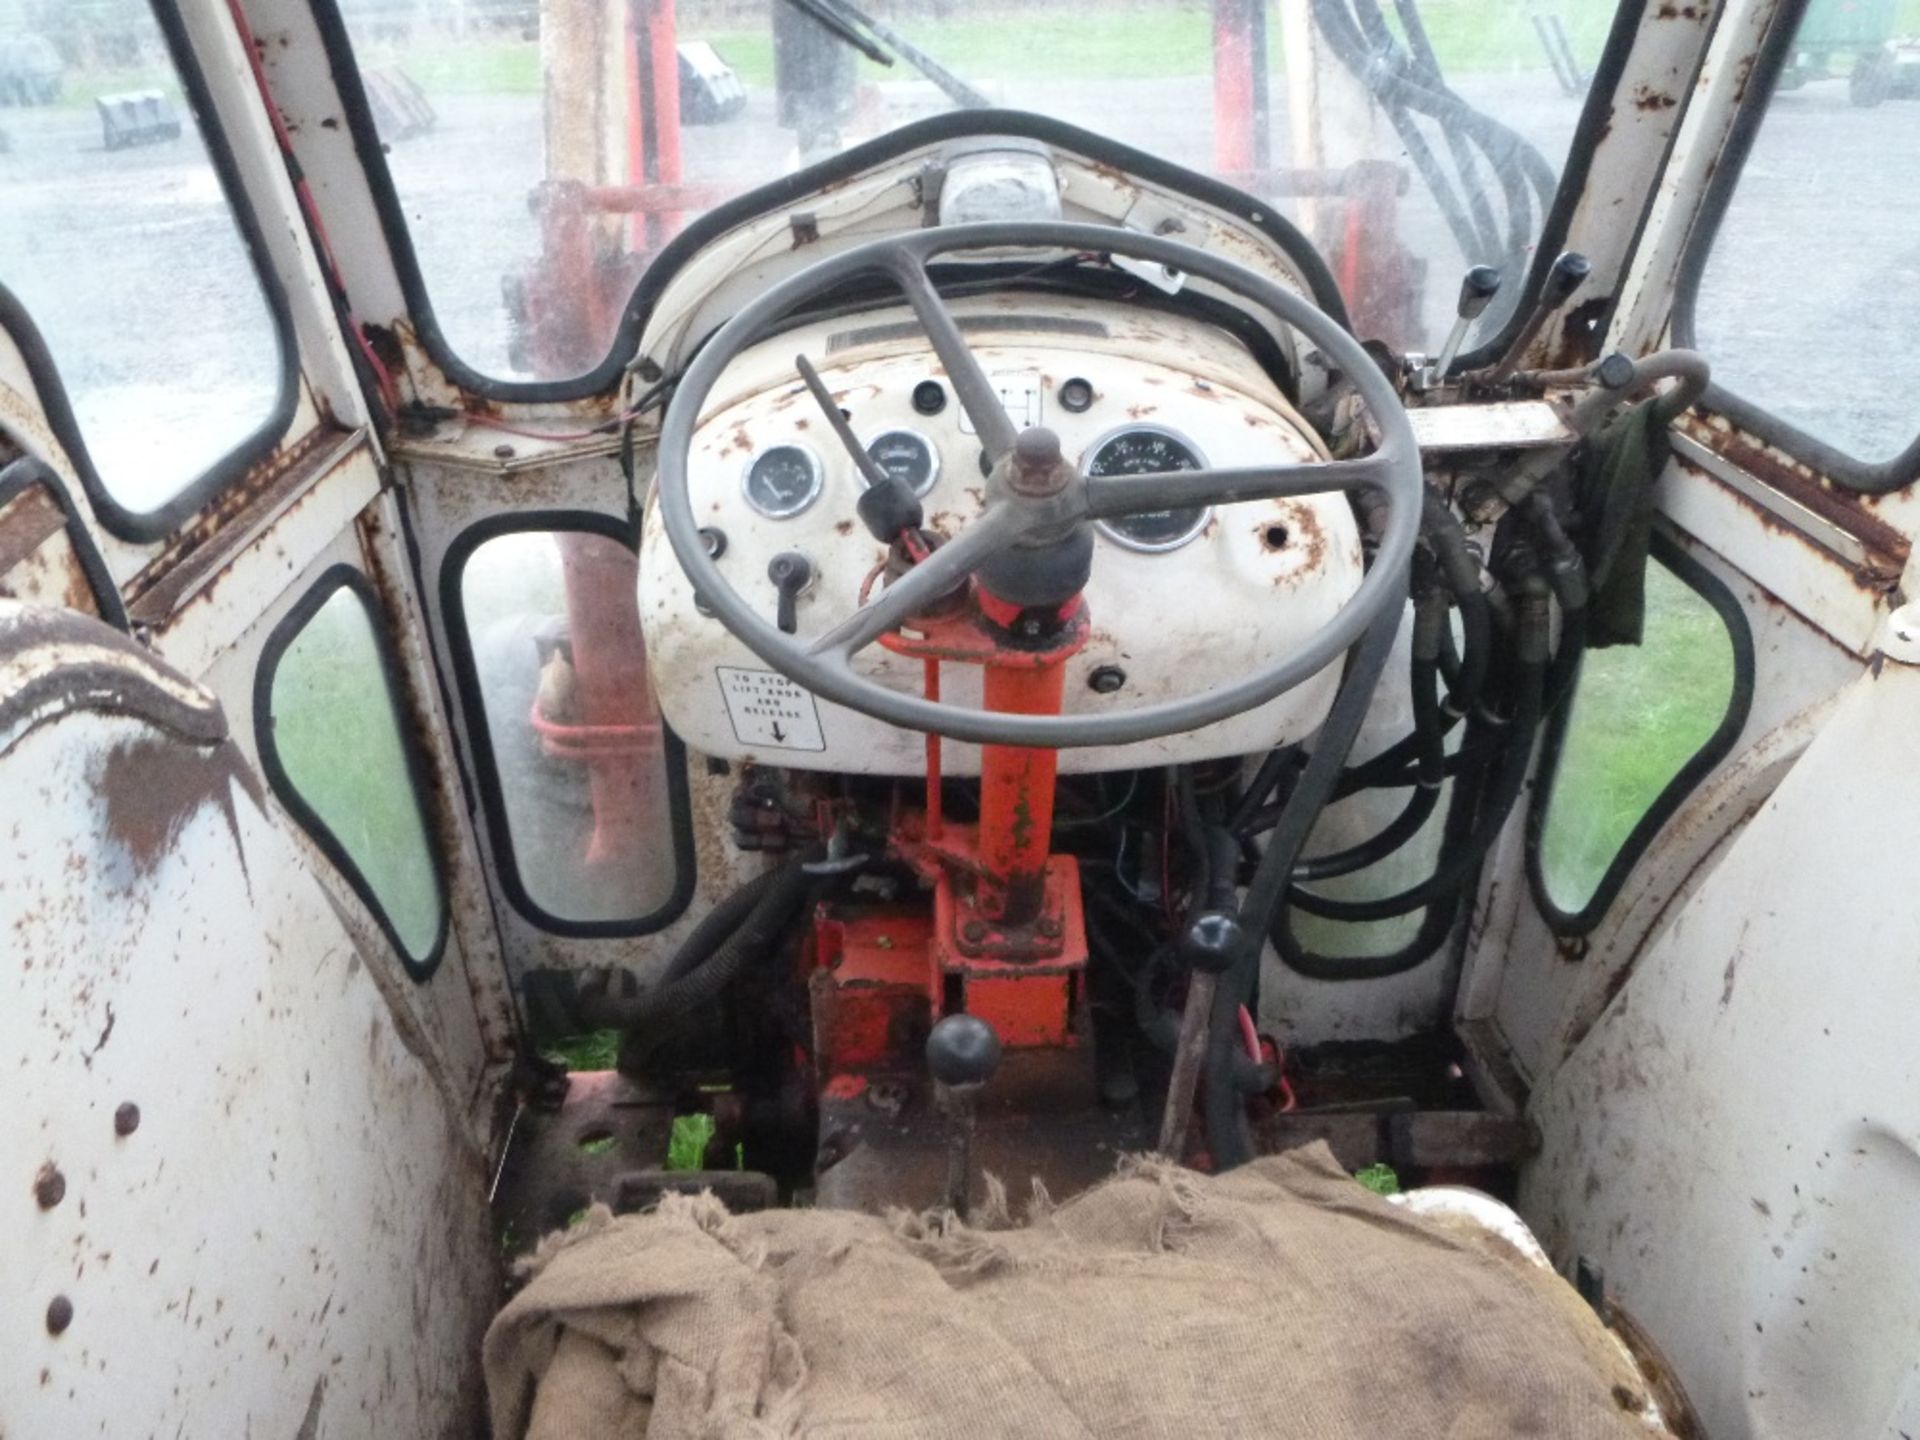 David Brown 995 Tractor with Loader & Muck Fork. V5 will be supplied.  Reg.No. LBX 248P - Image 4 of 4